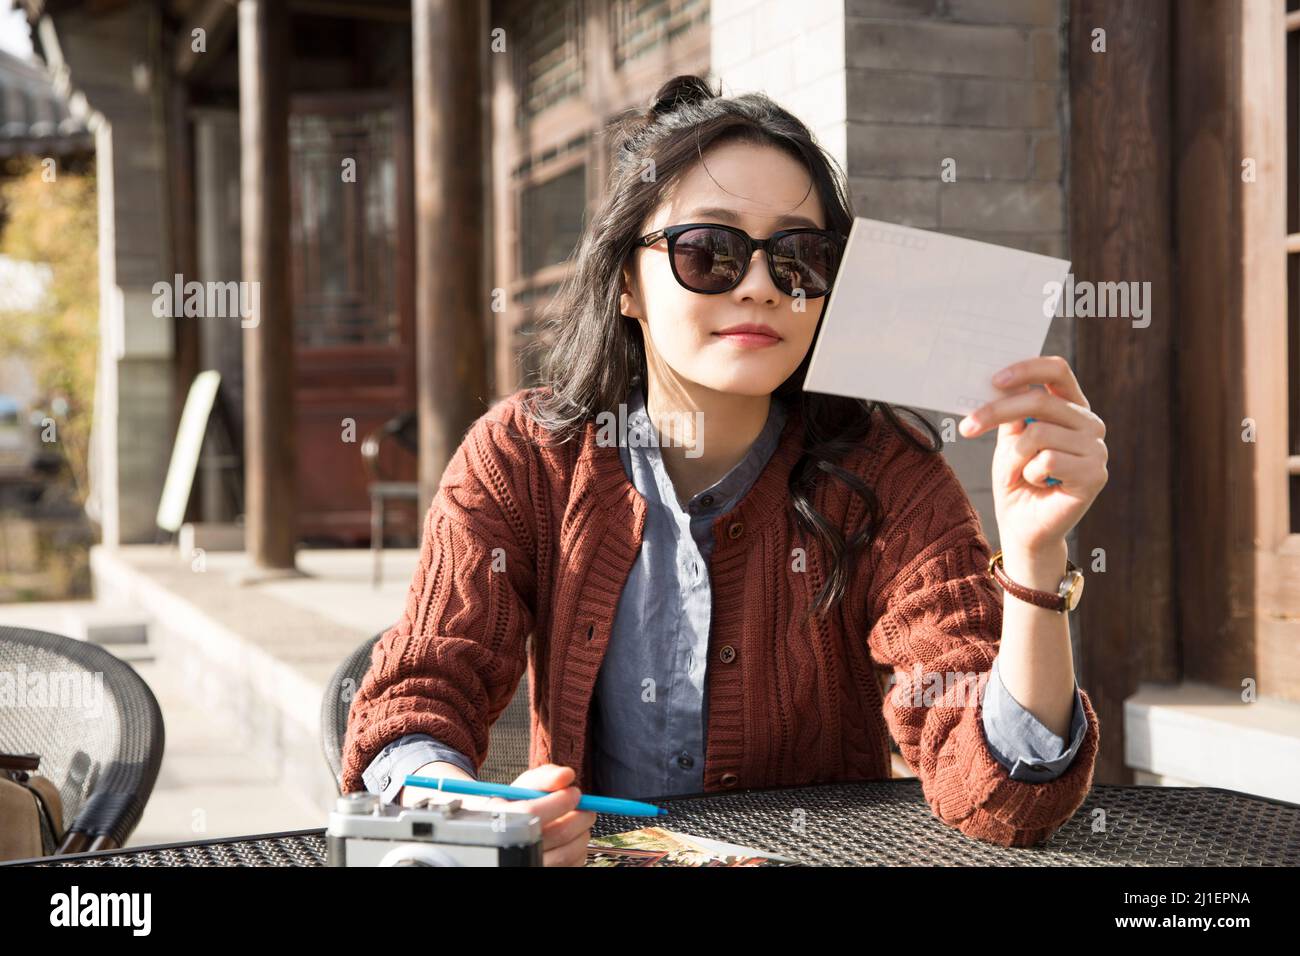 Female tourist writing postcard at an outdoor cafe - stock photo Stock Photo